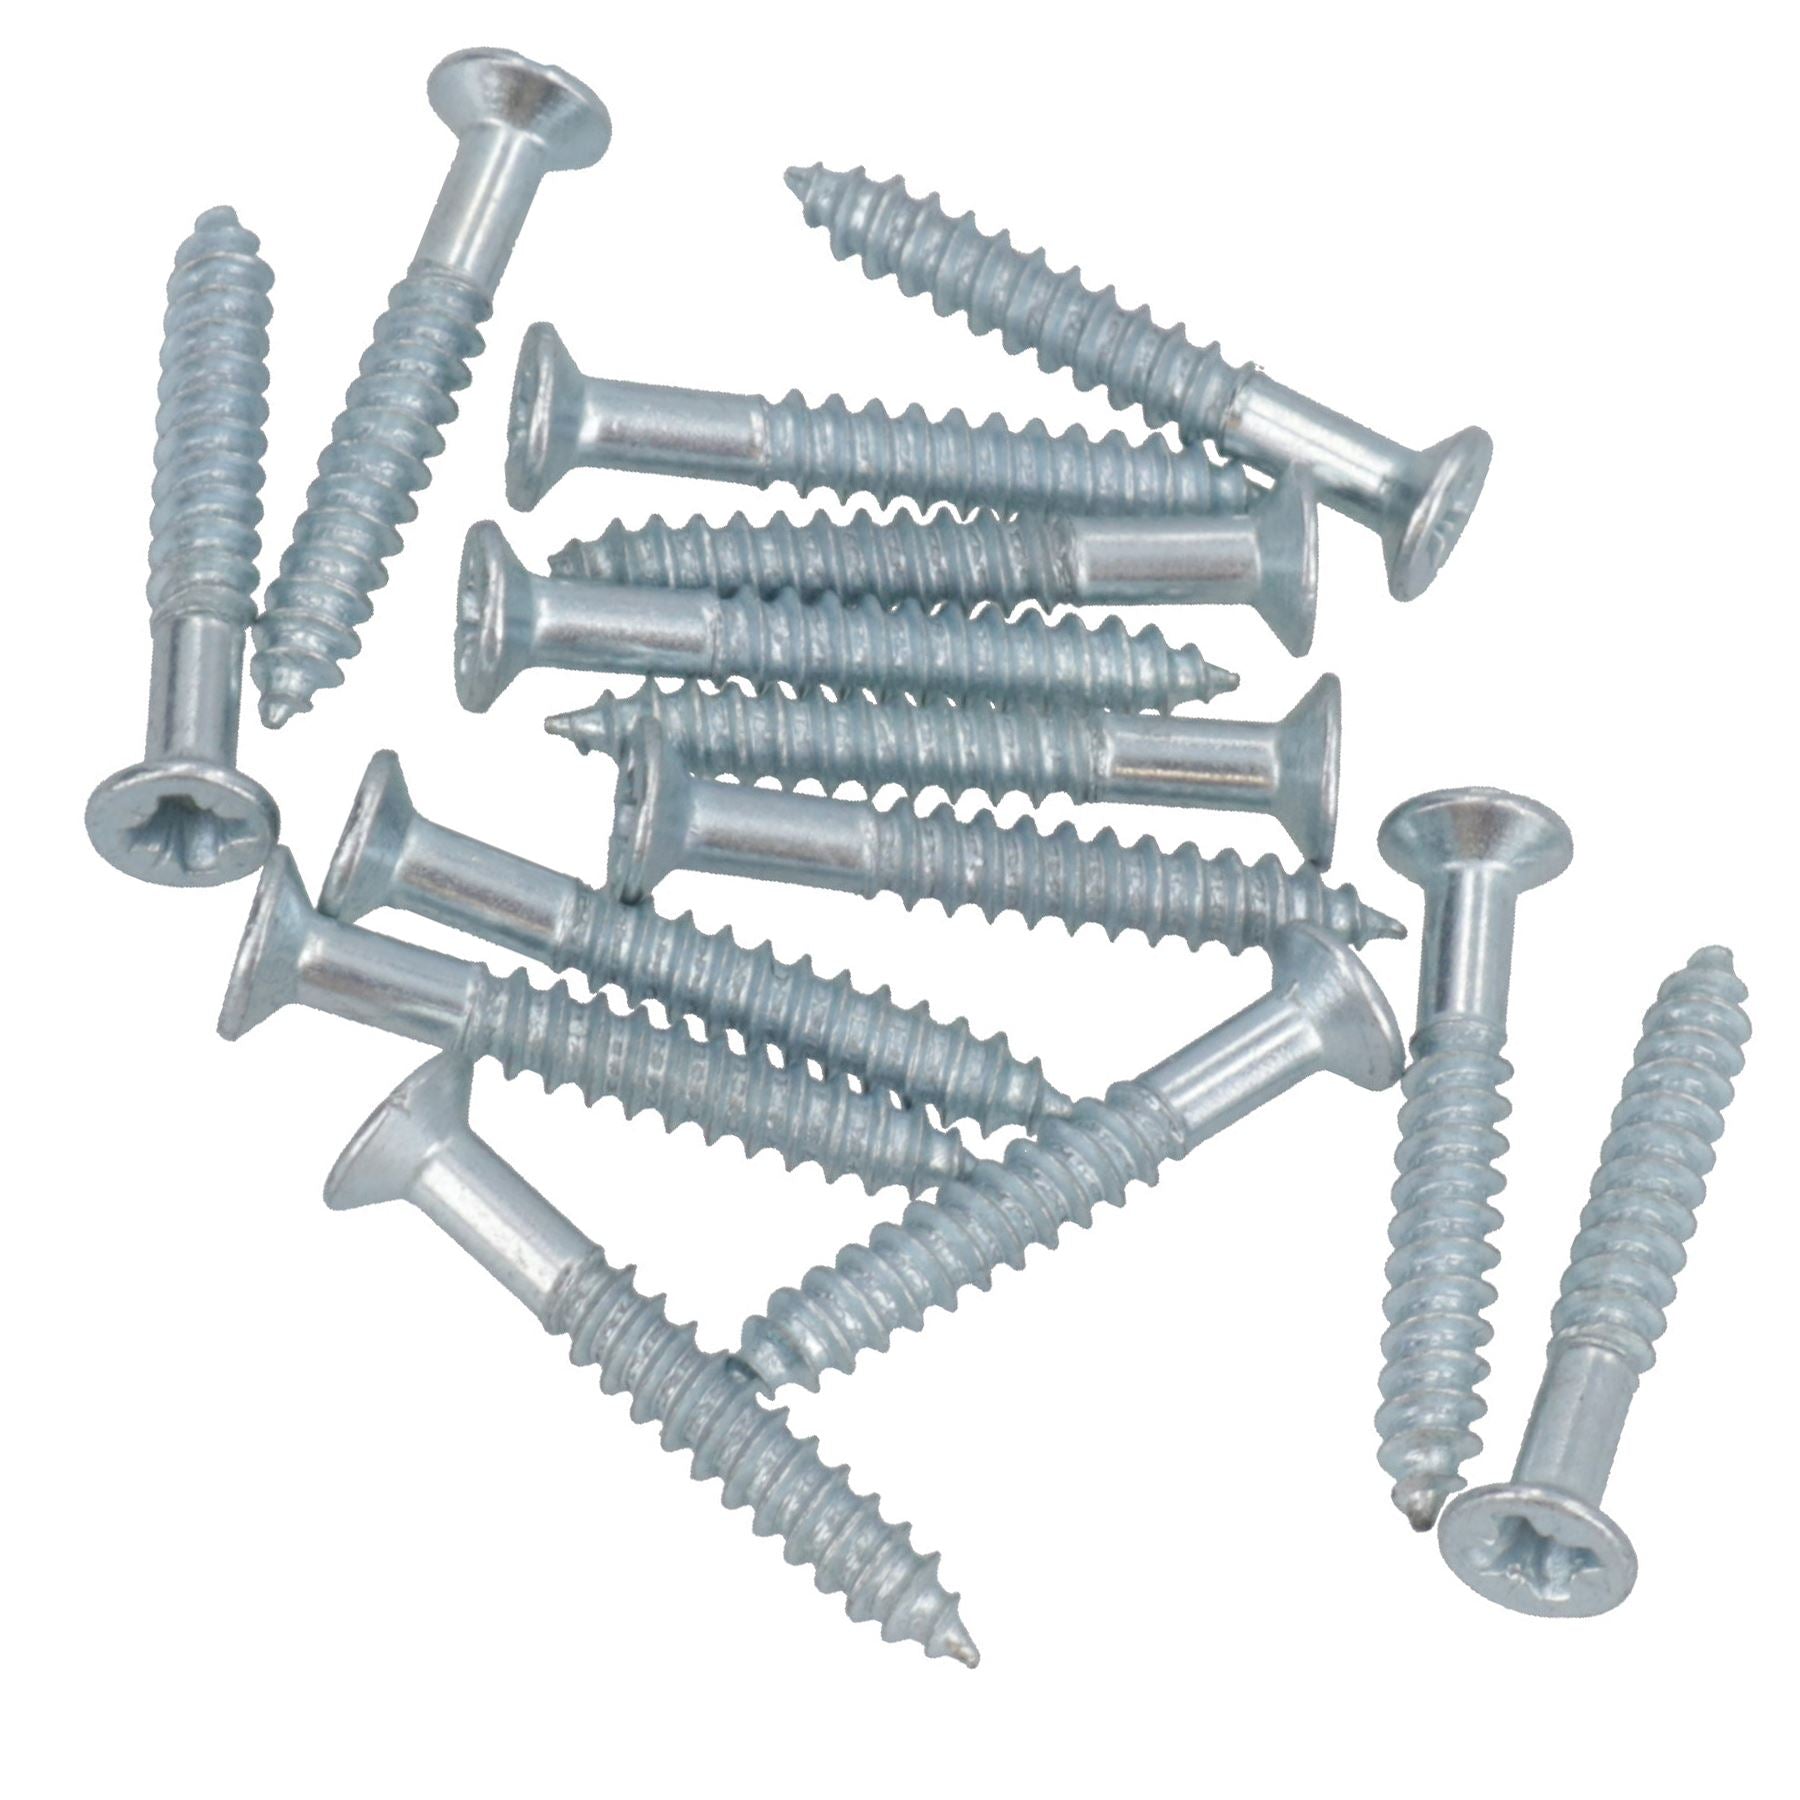 3.5mm x 25mm PZ2 Countersunk Wood Screws Fasteners with Raw Plugs